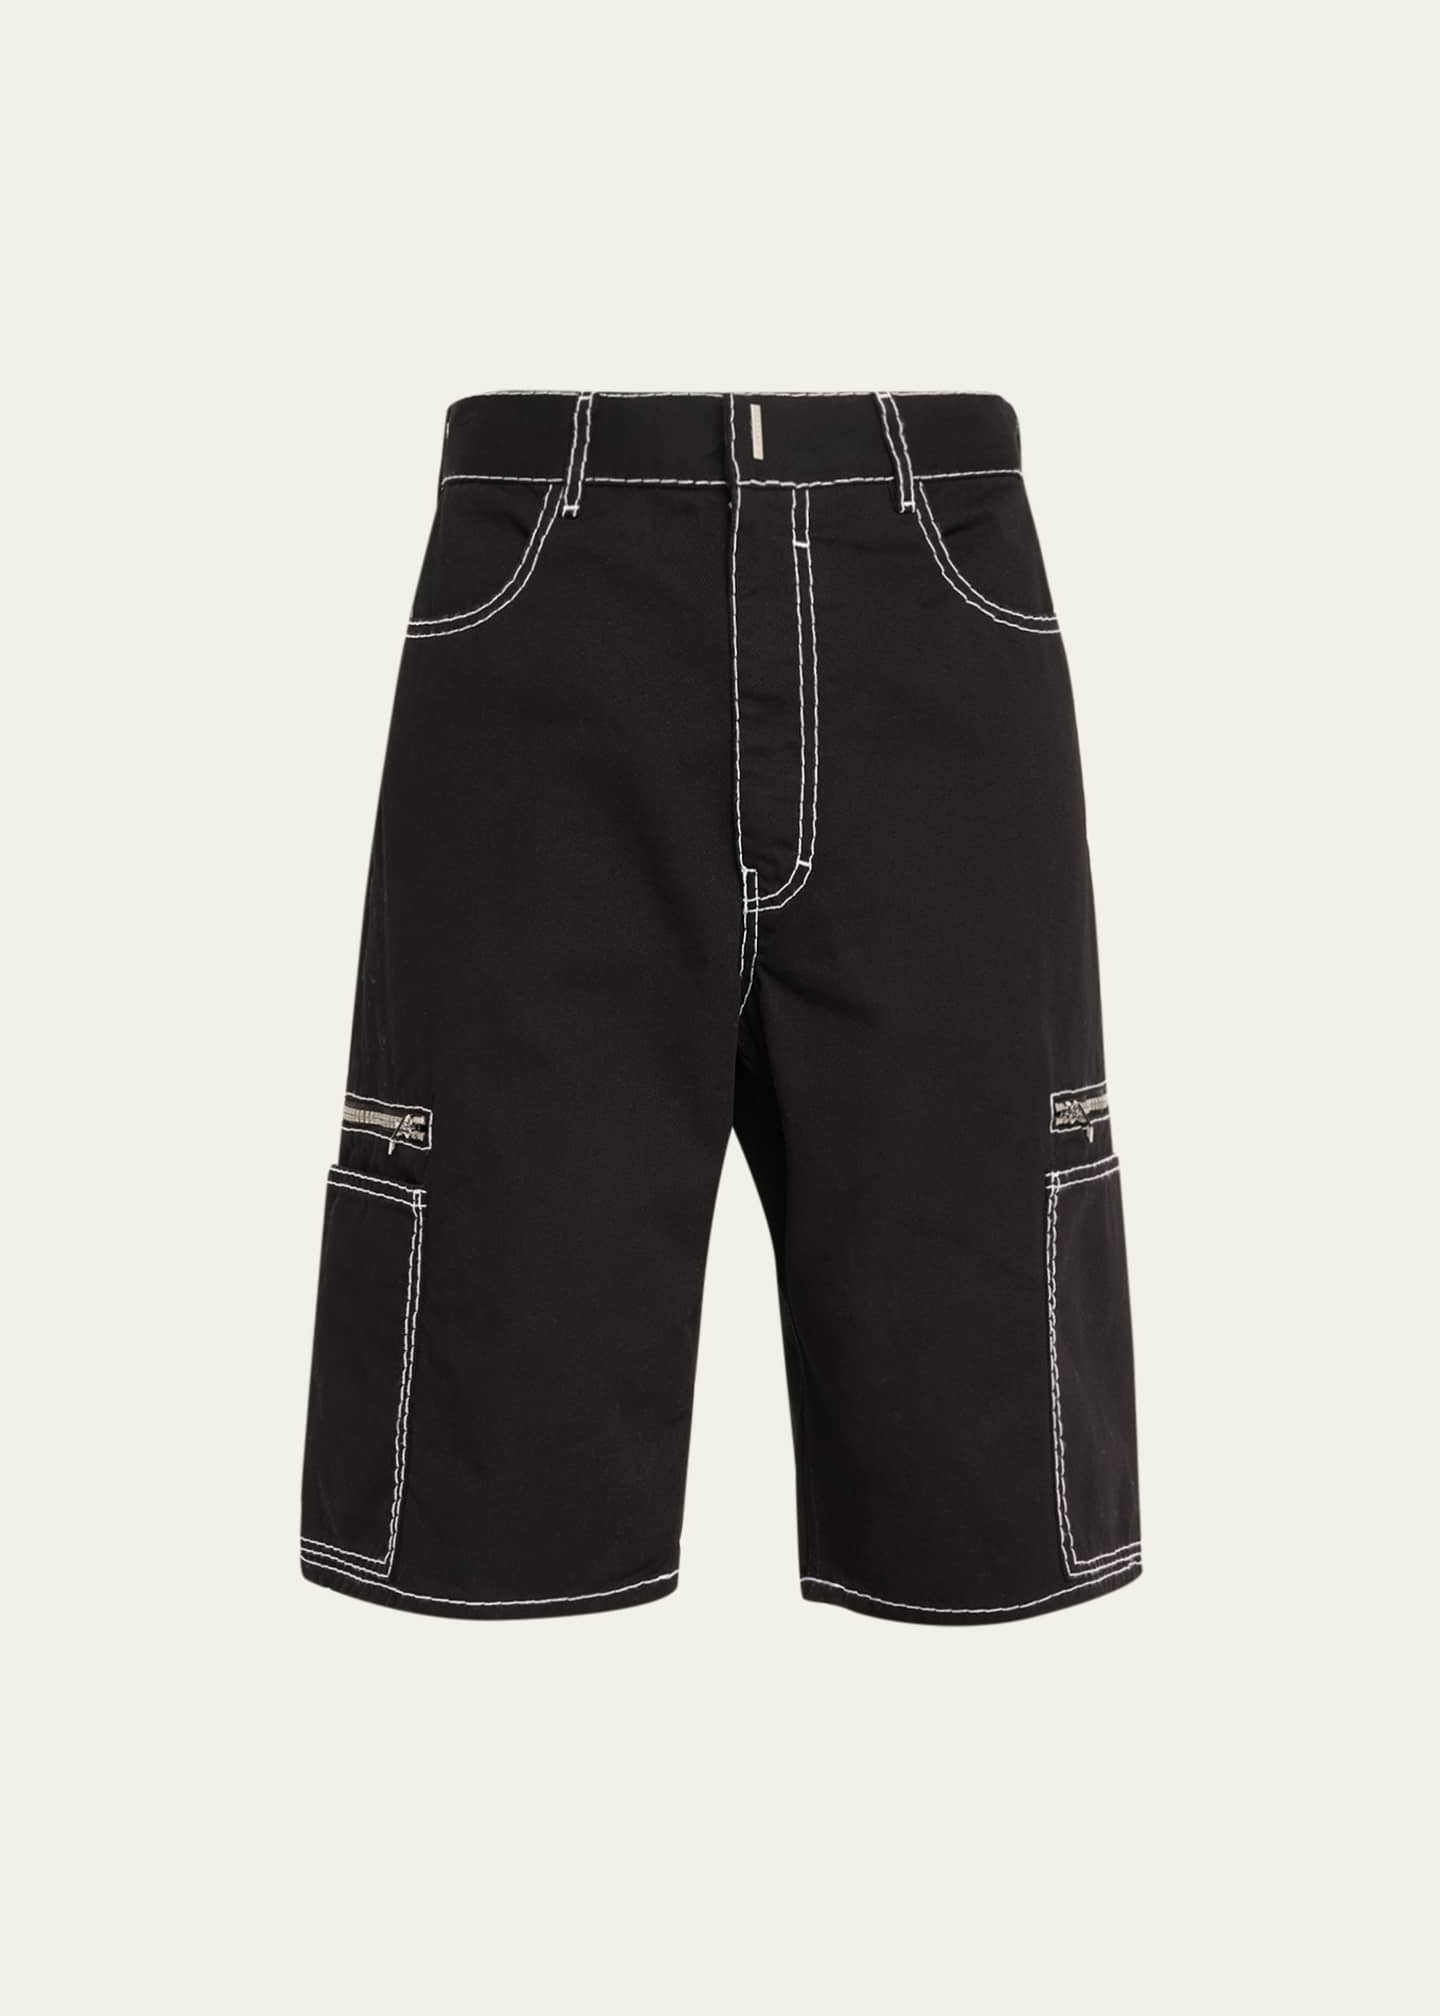 Givenchy Men's Topstitched Loose-Fit Cargo Shorts - Bergdorf Goodman